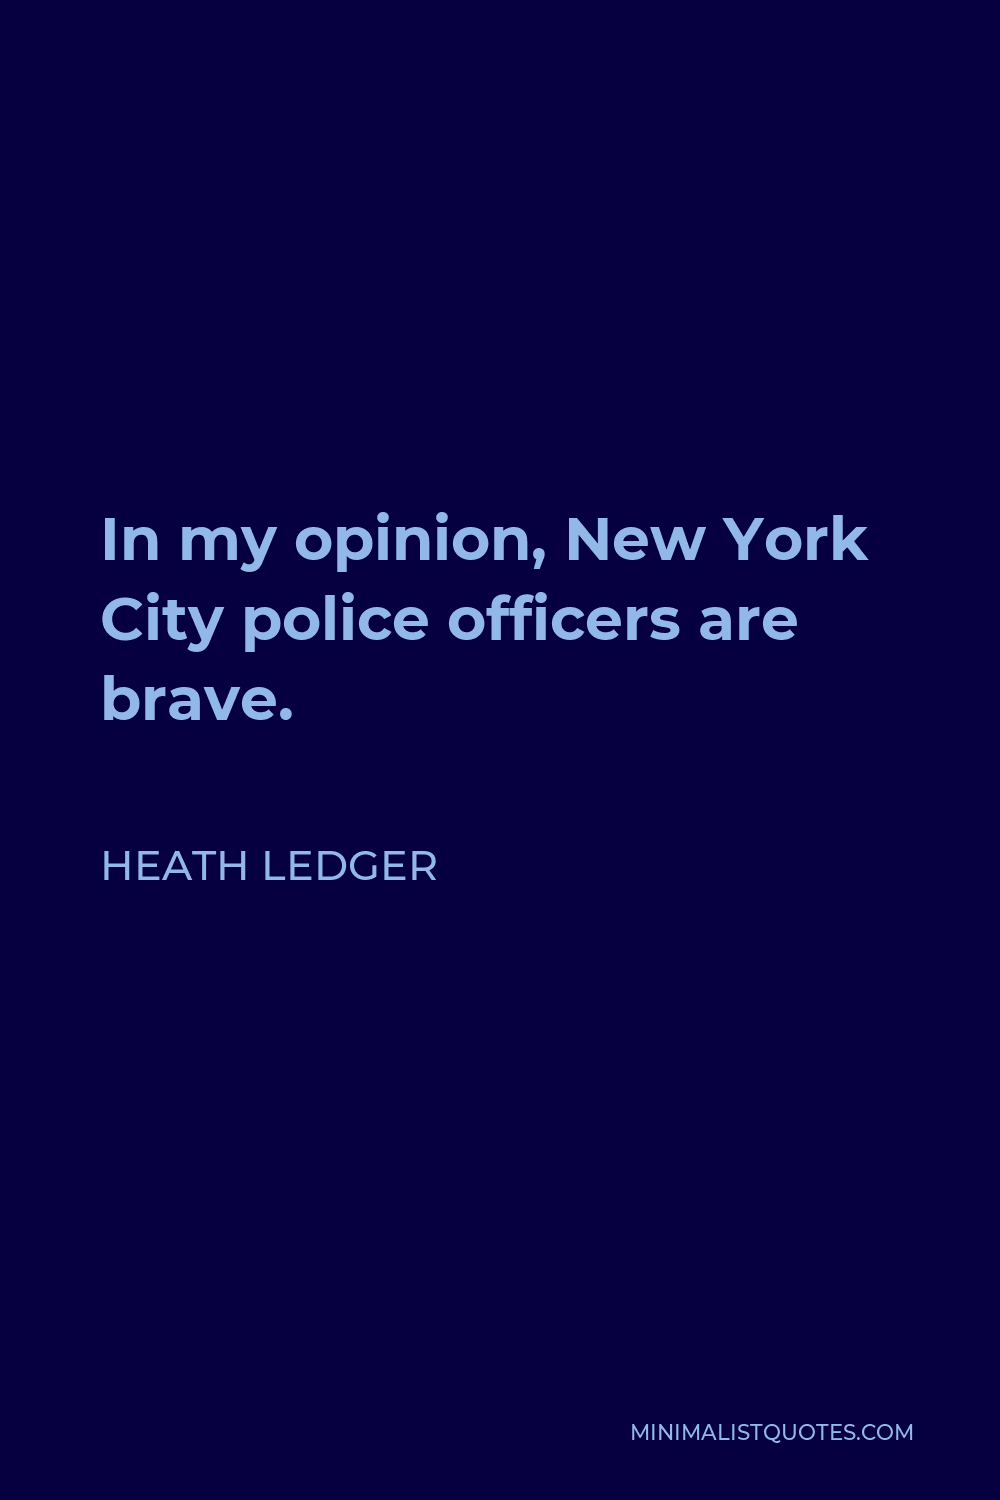 Heath Ledger Quote - In my opinion, New York City police officers are brave.